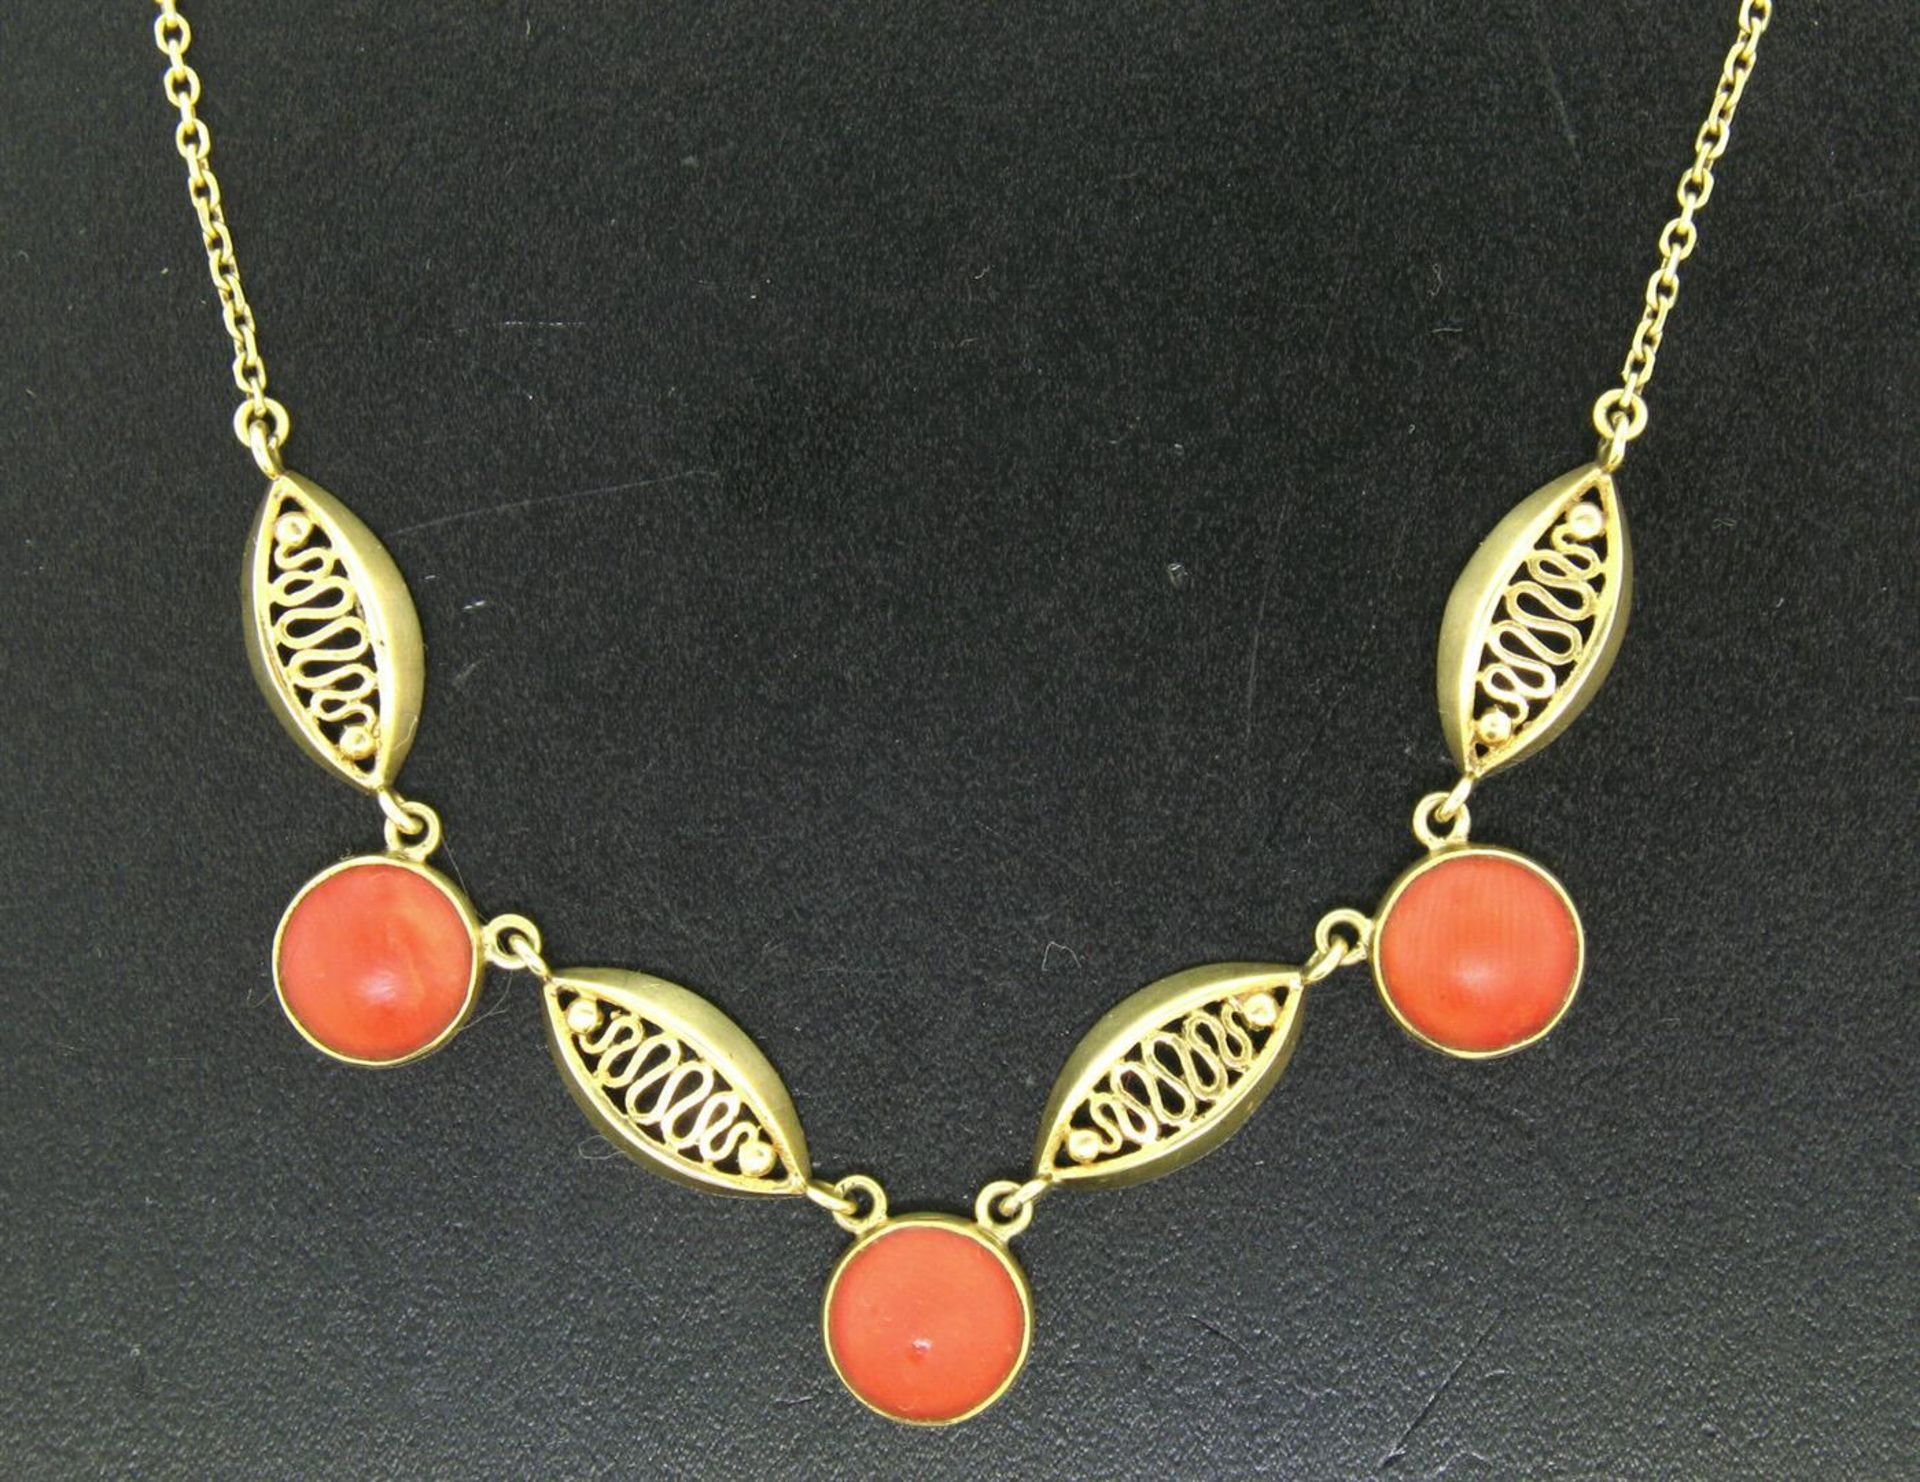 14k Solid Gold Ox Blood Red Coral Open Work Collar Necklace - Image 5 of 5